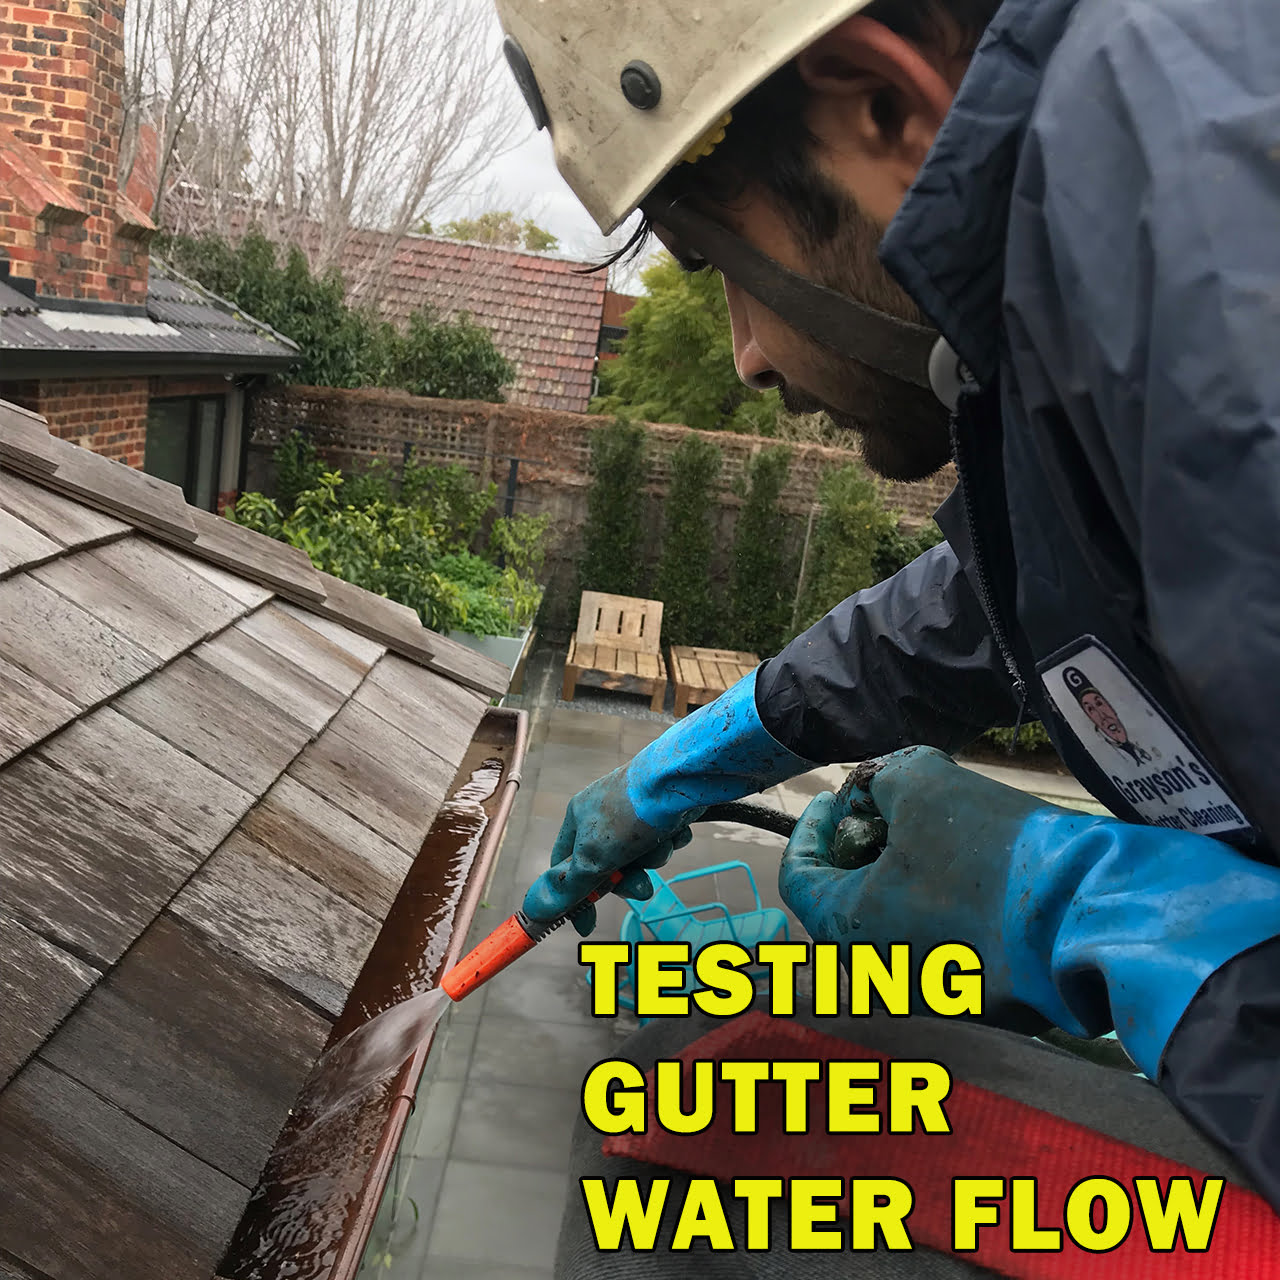 How to test gutter water flow